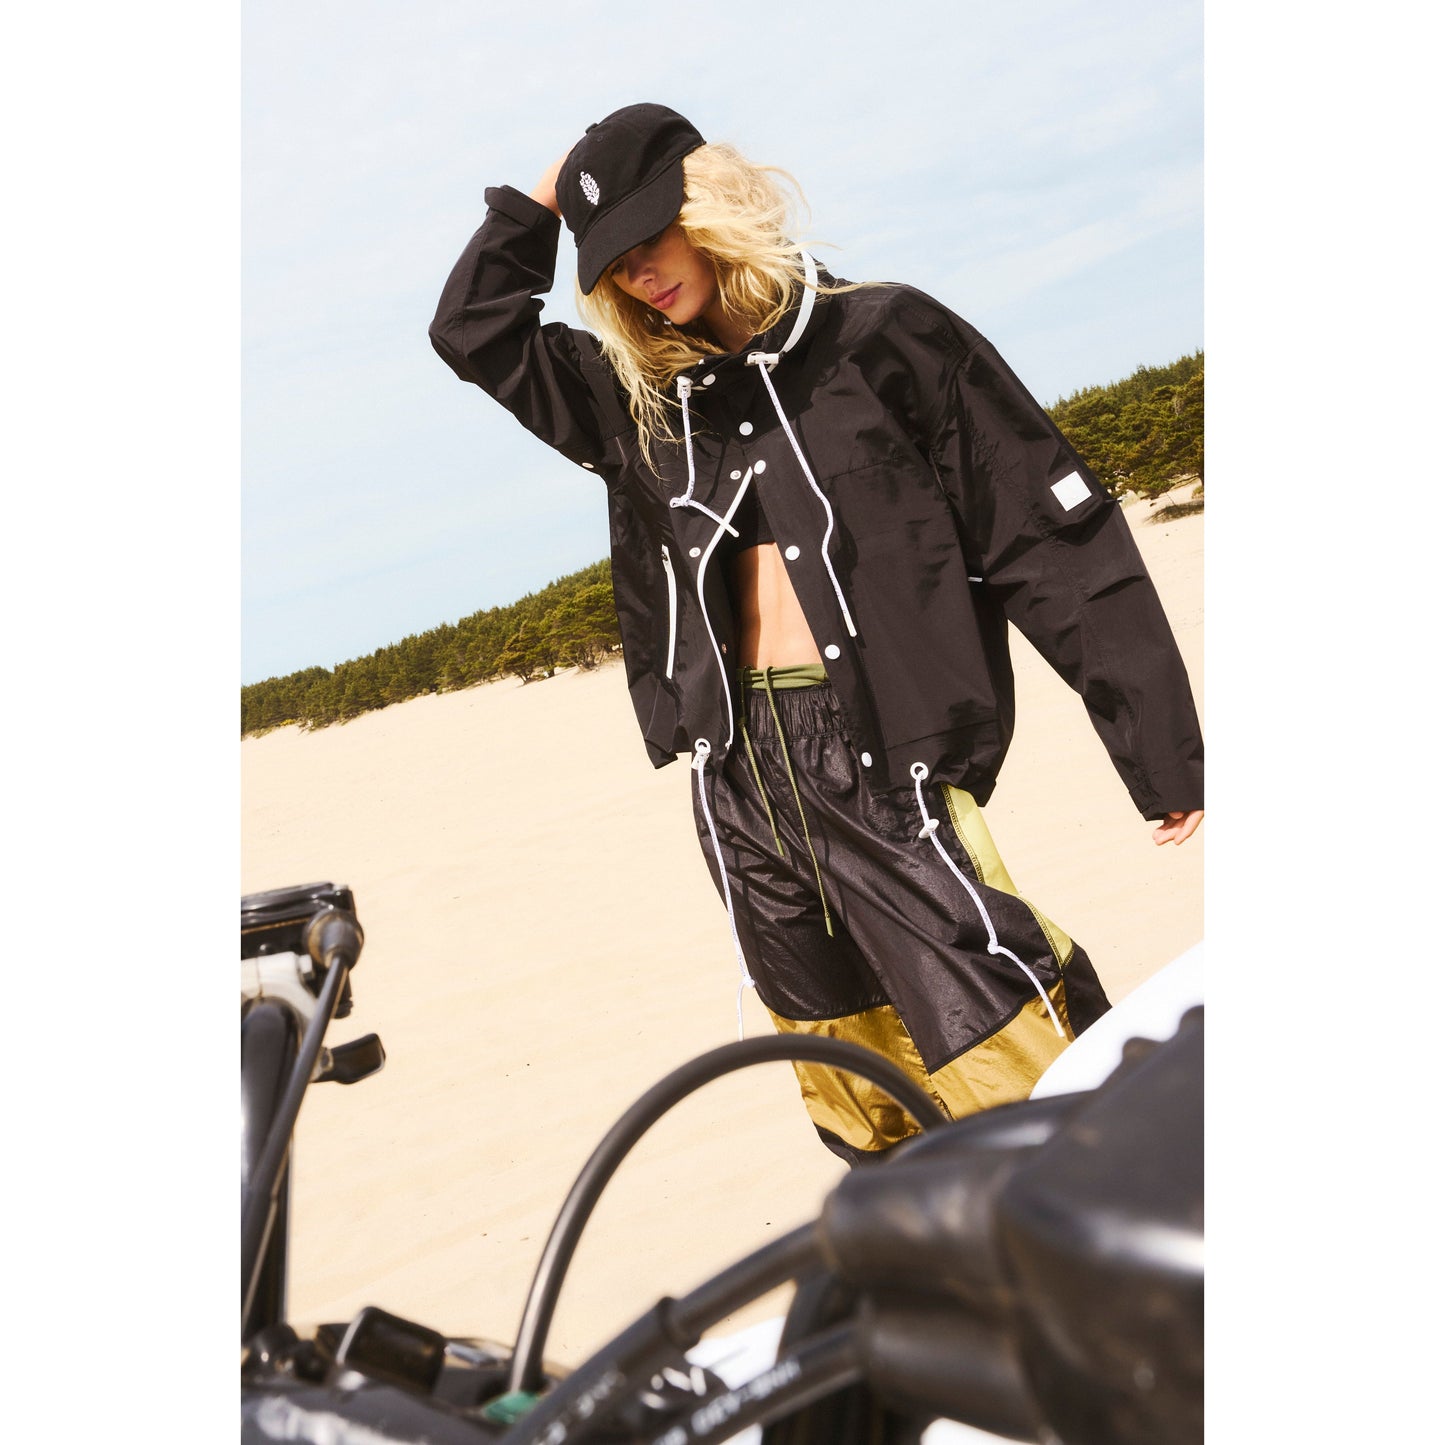 Woman in a stylish waterproof Free People Movement Rain & Shine Jacket in black and white and green pants posing near a motorcycle on a sandy beach.